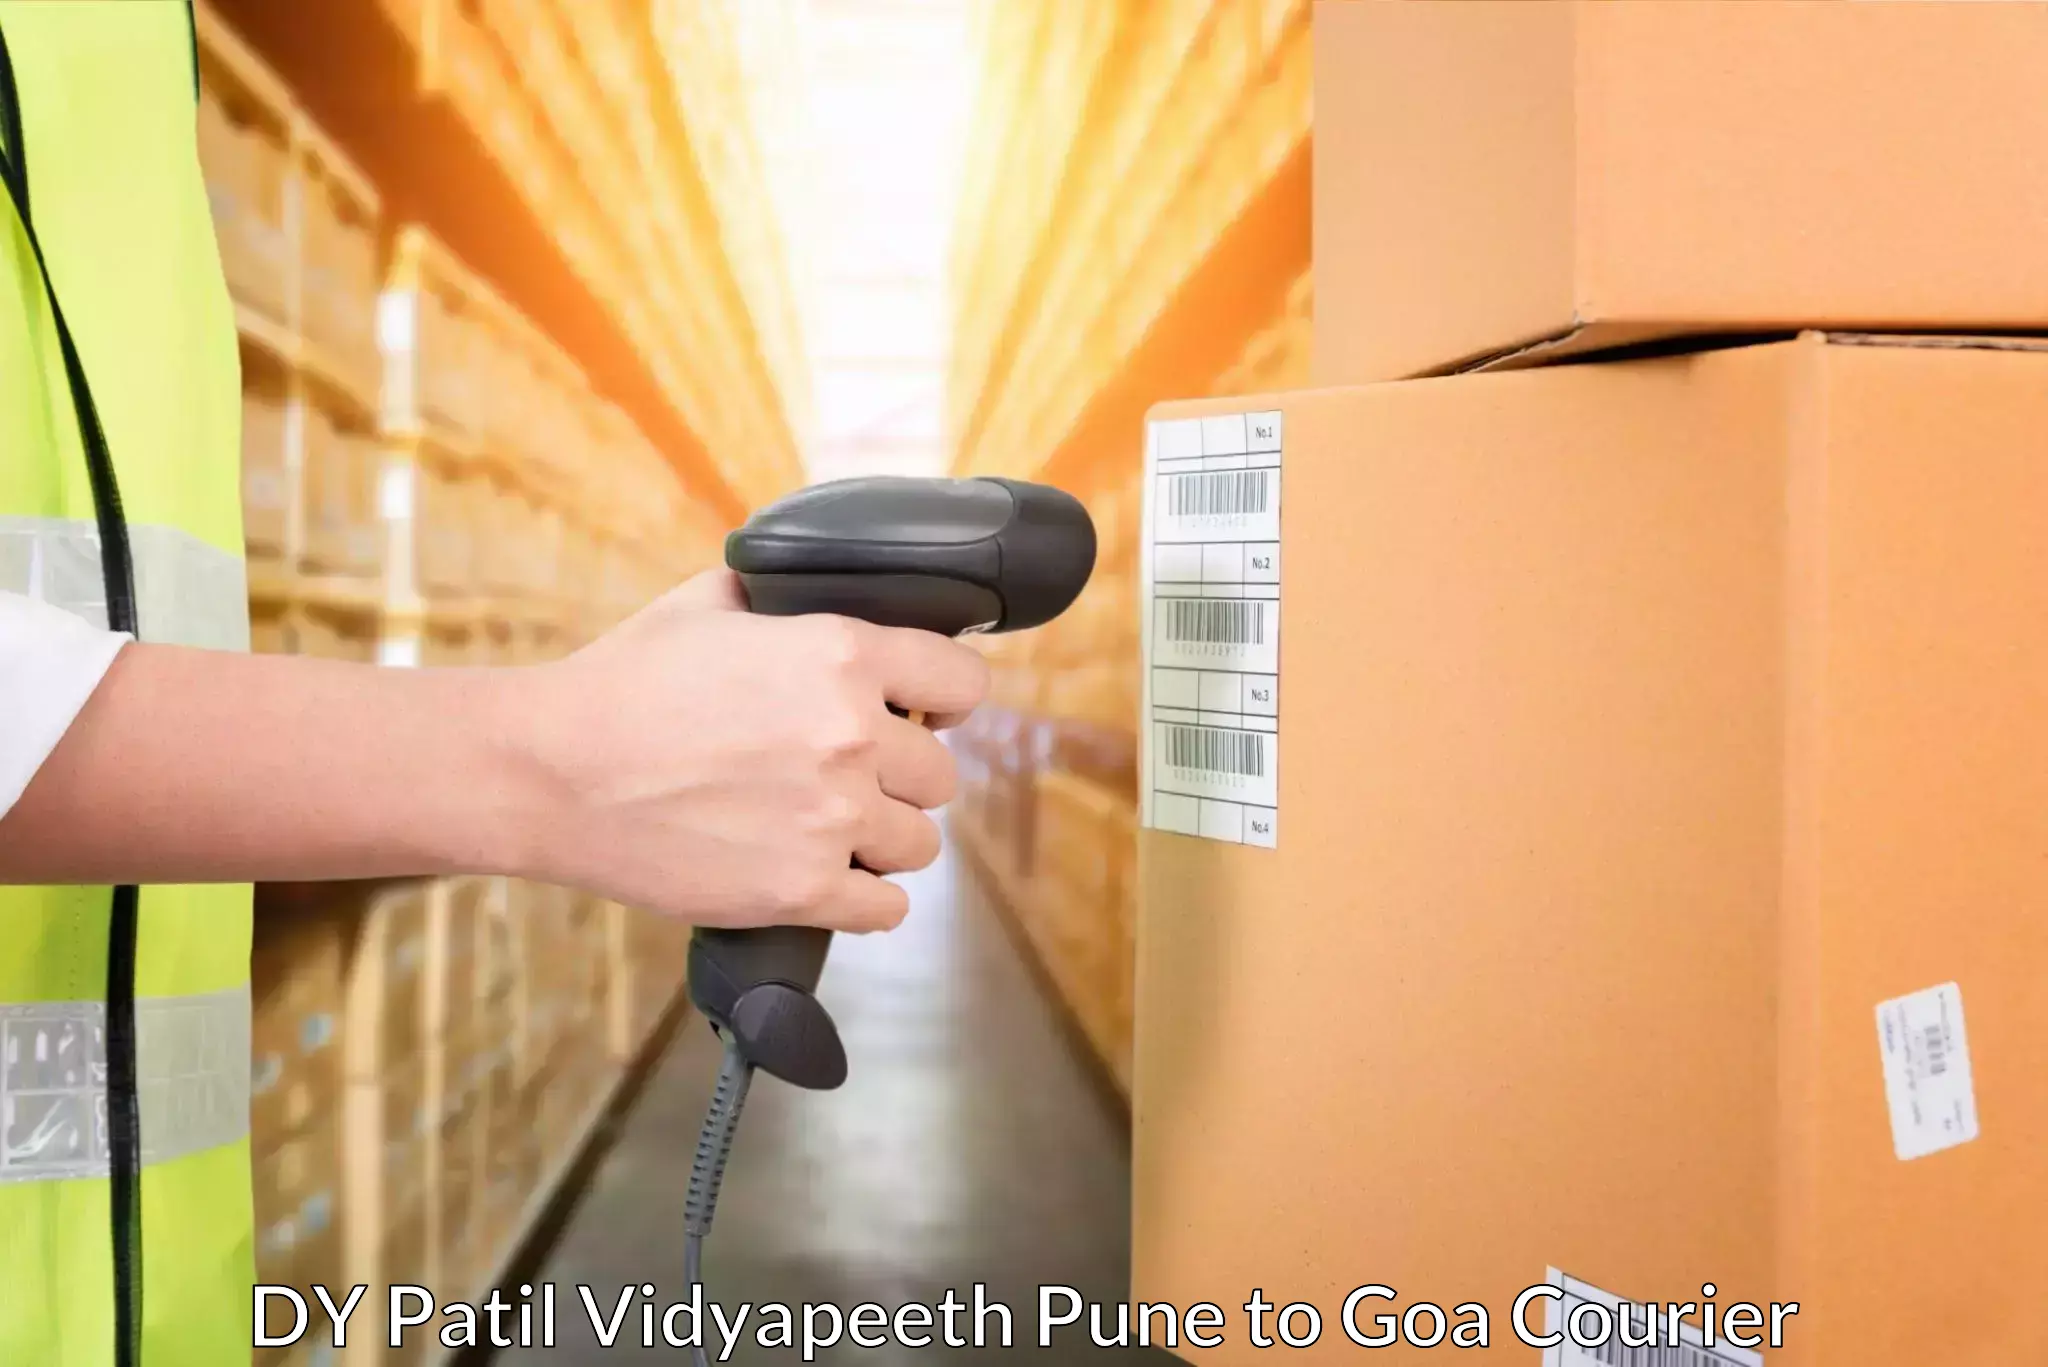 Speedy delivery service in DY Patil Vidyapeeth Pune to Mormugao Port